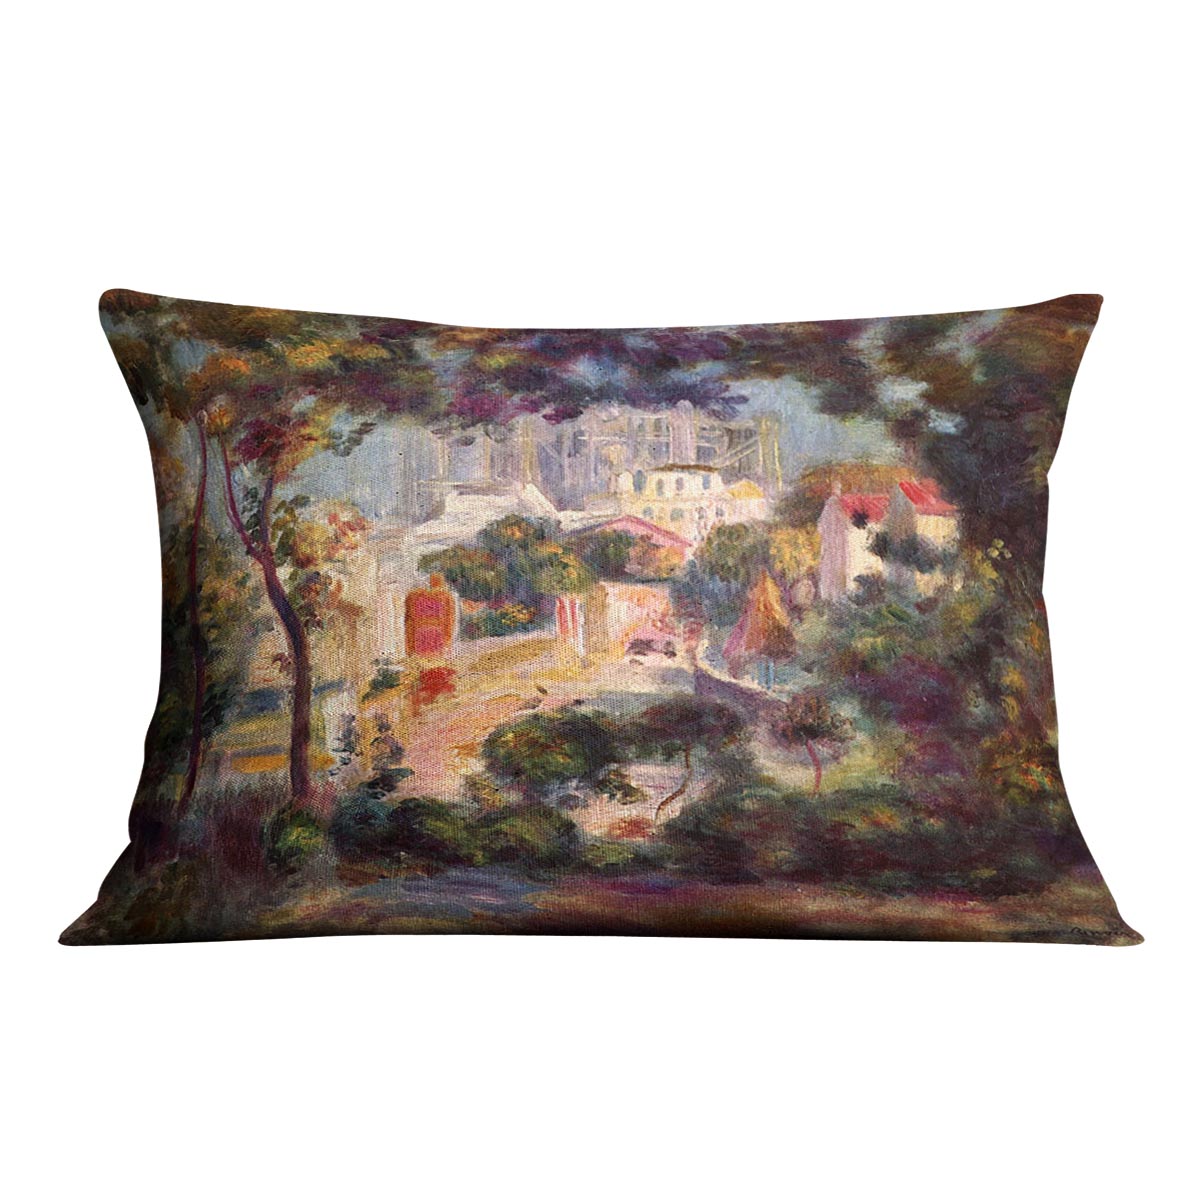 Landscape with the view of Sacre Coeur by Renoir Cushion